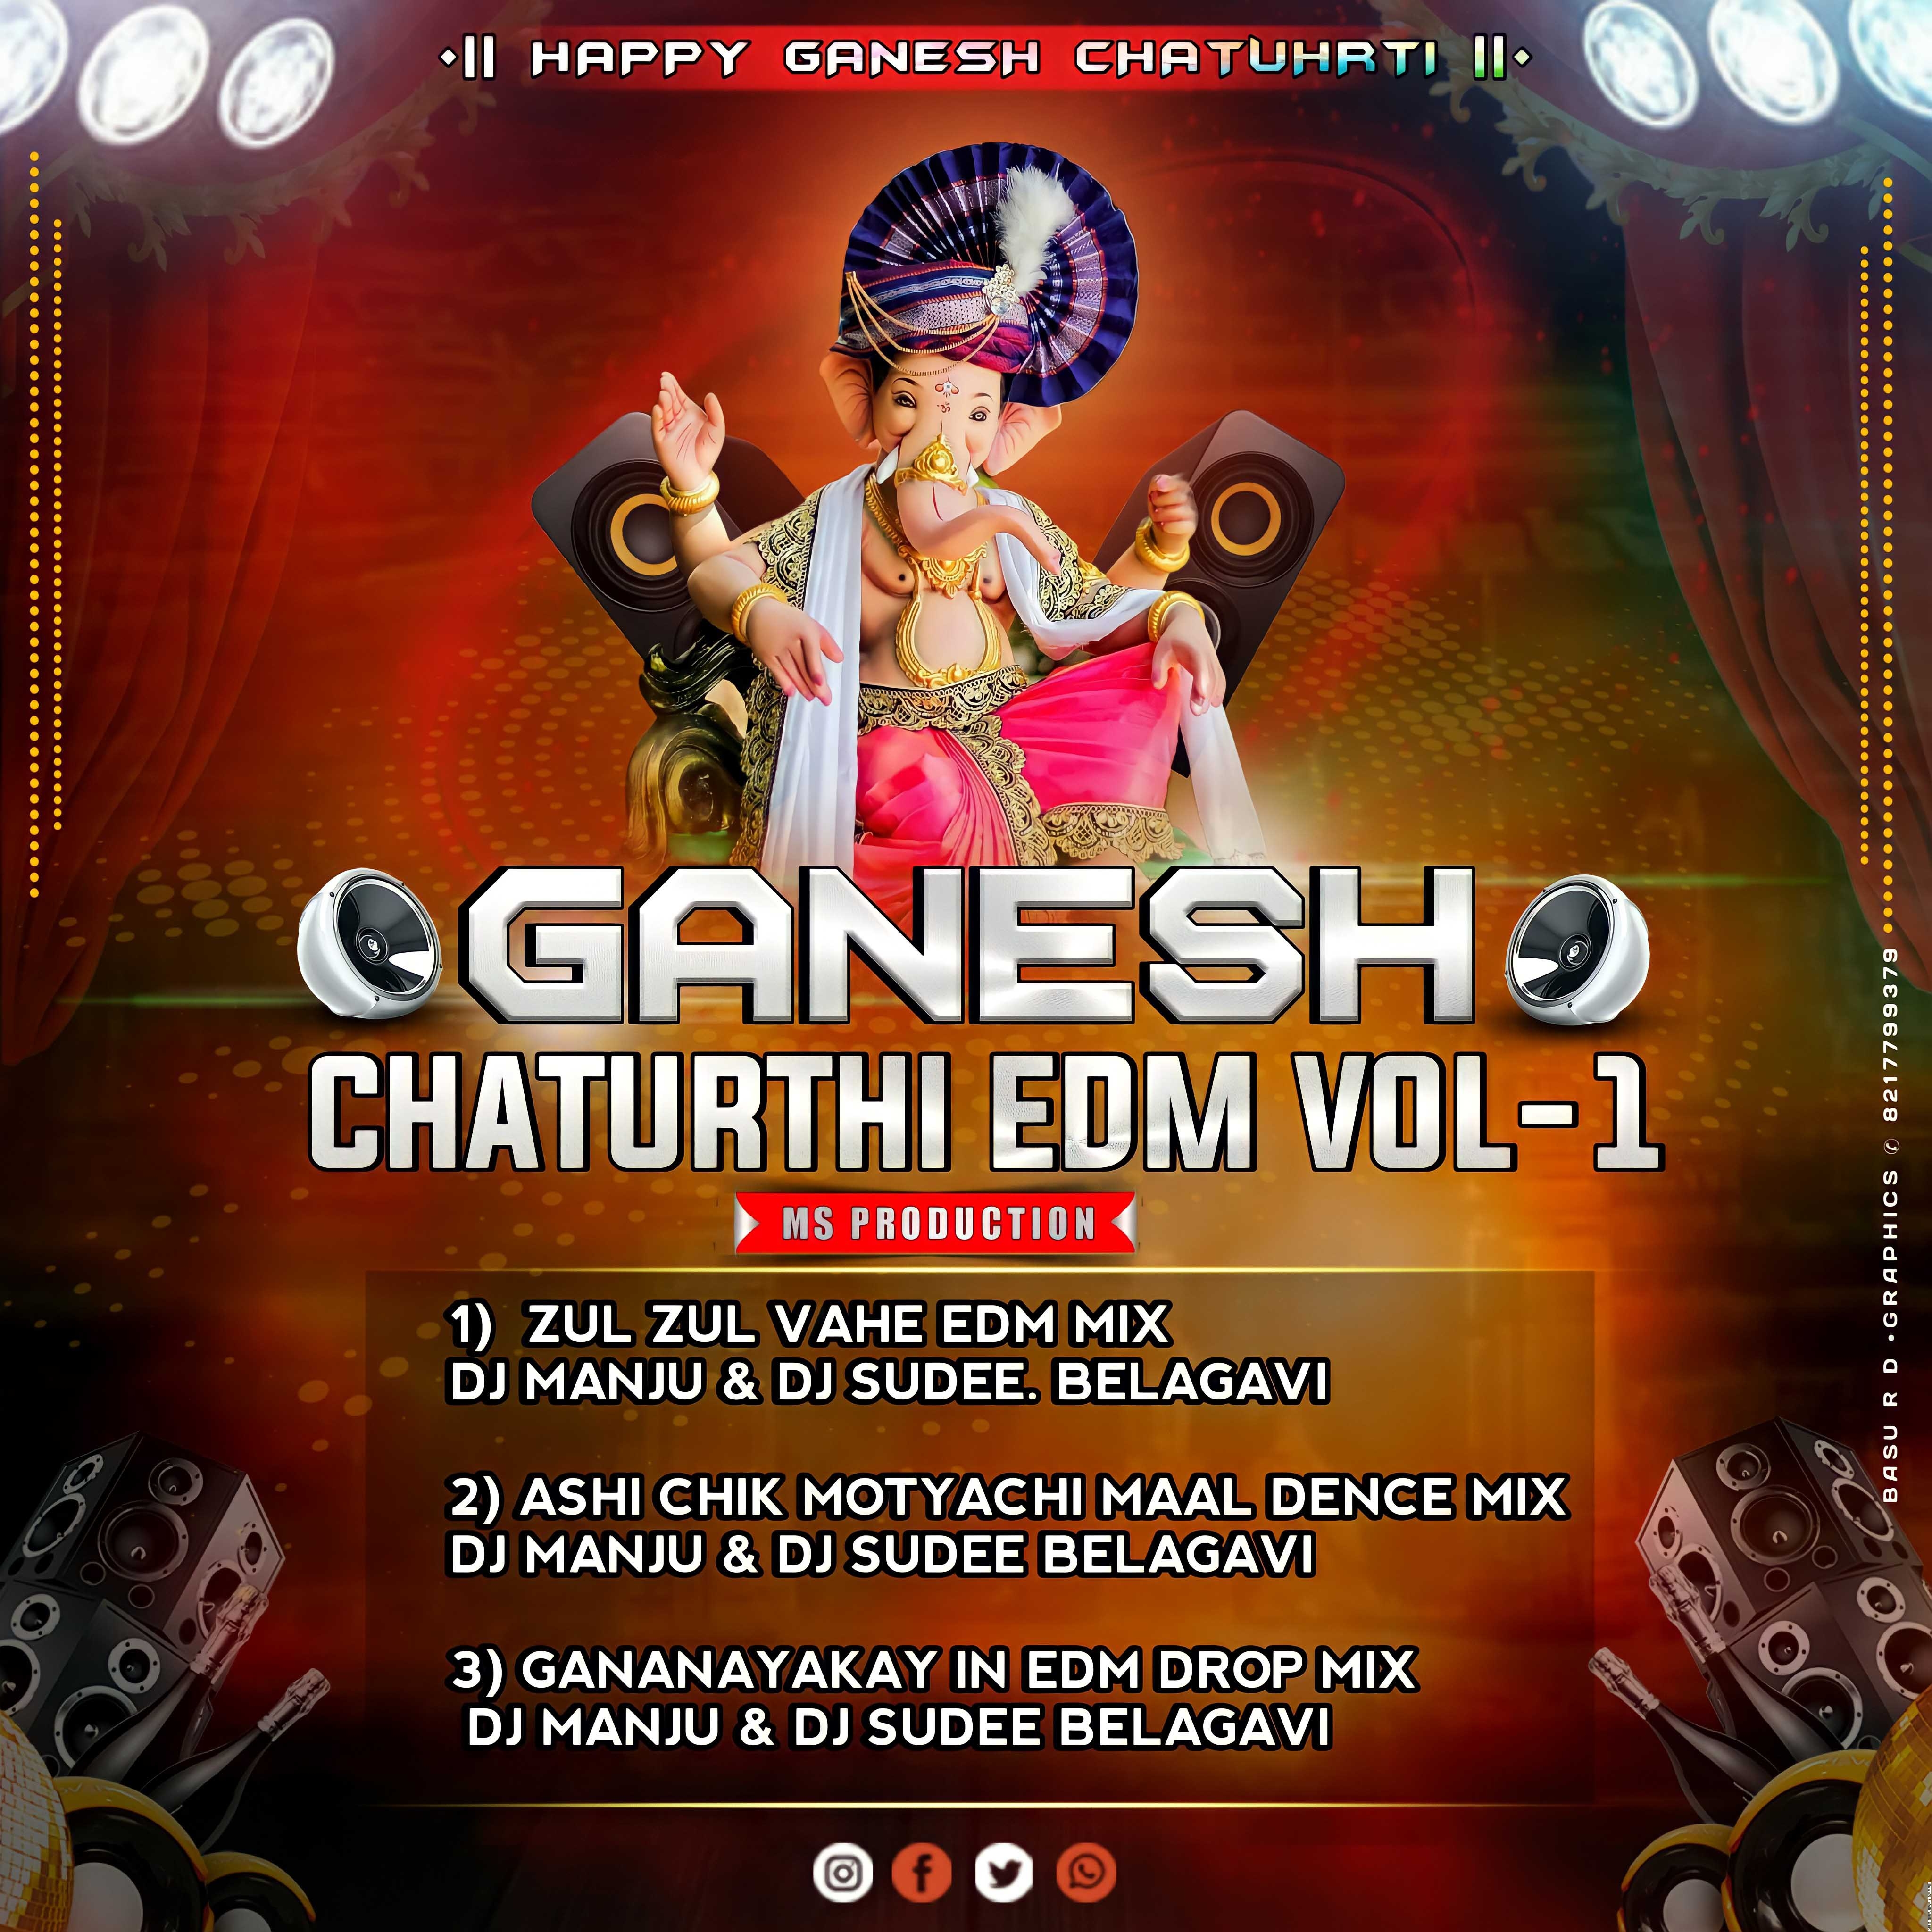 Ganesh chaturthi special EDM MIX Song